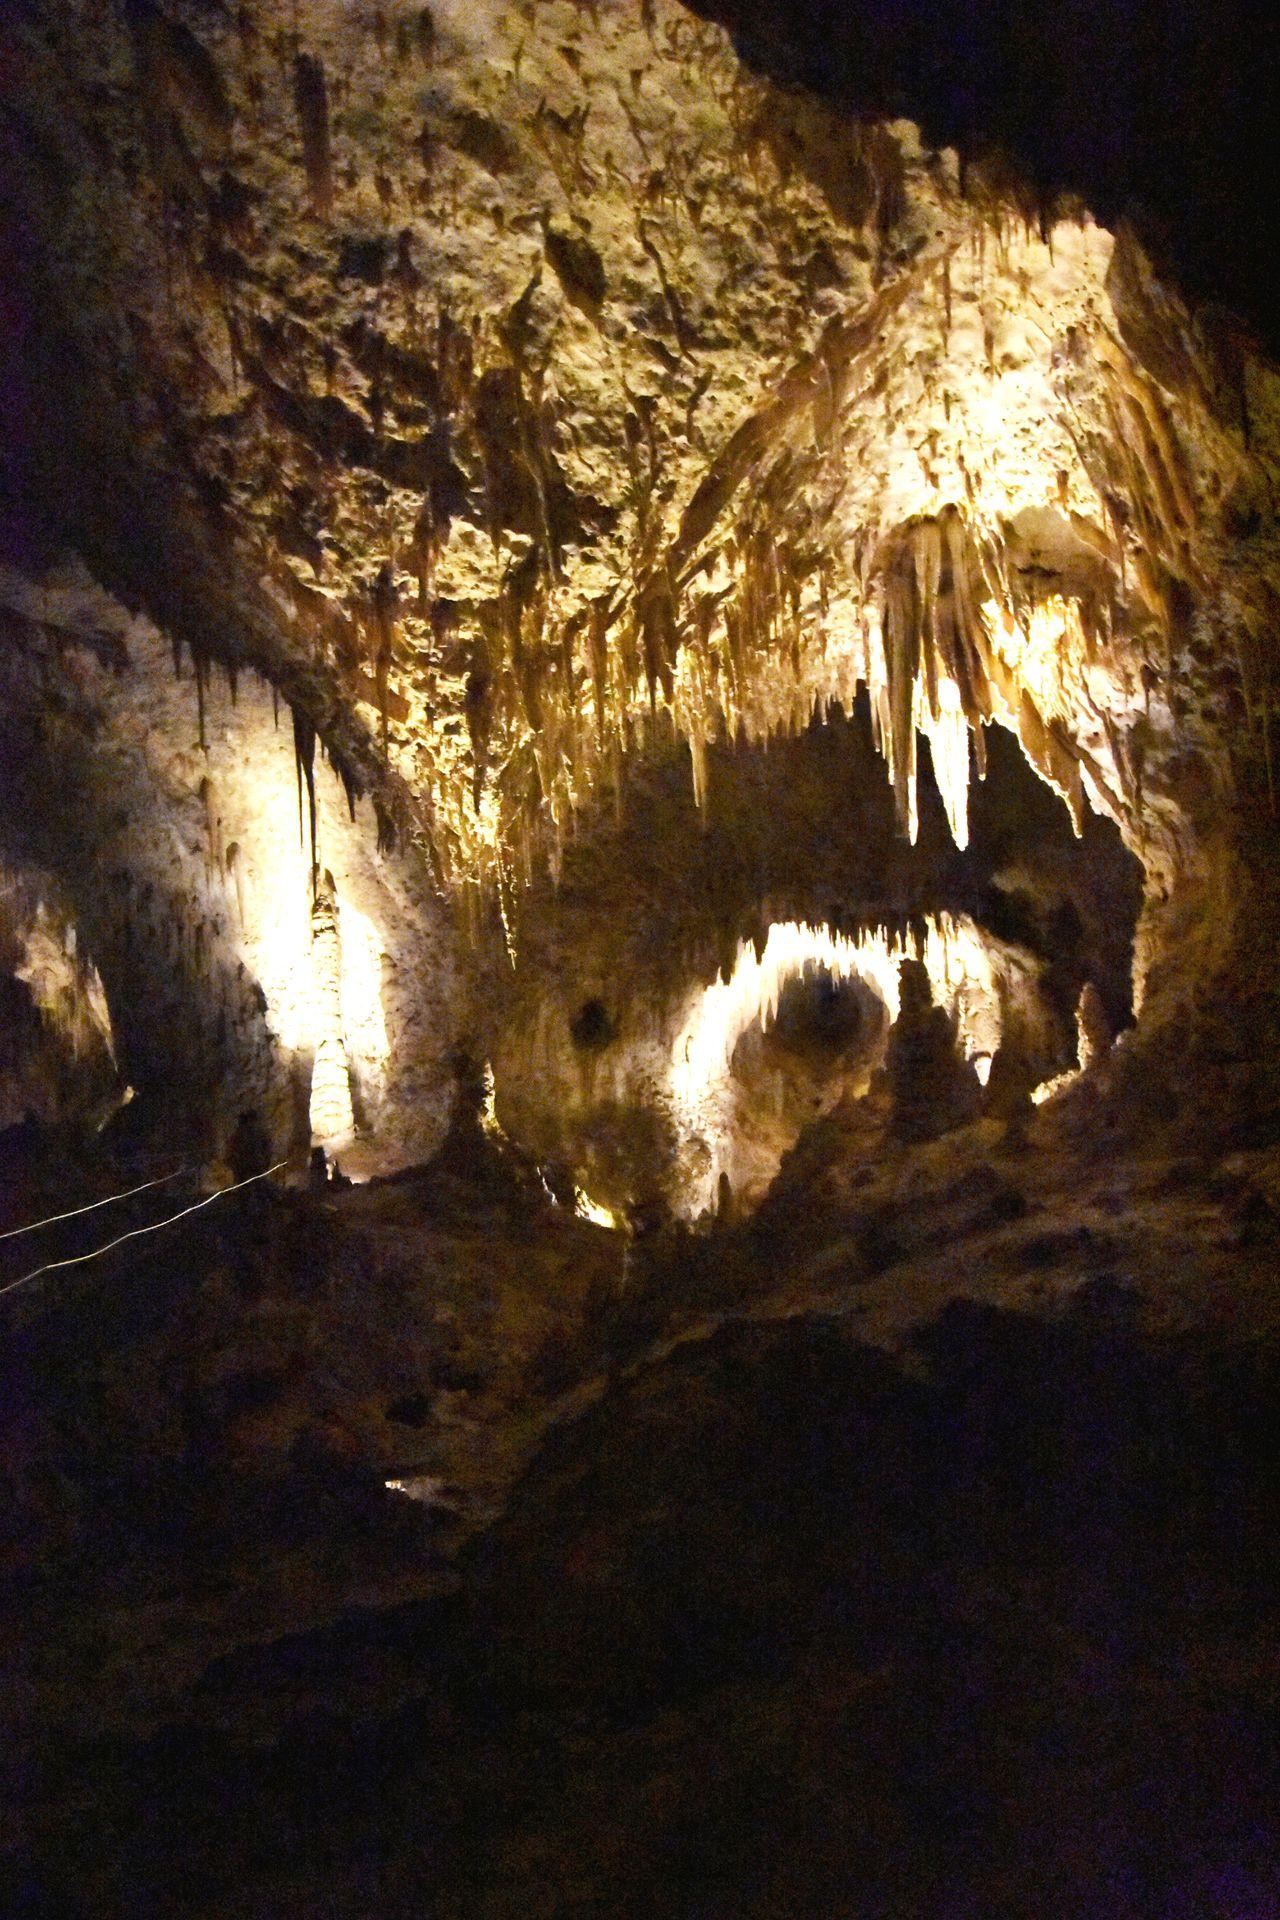 A dimly lit photo of the interior of the cave. There are several pointy stalactites and stalactites.